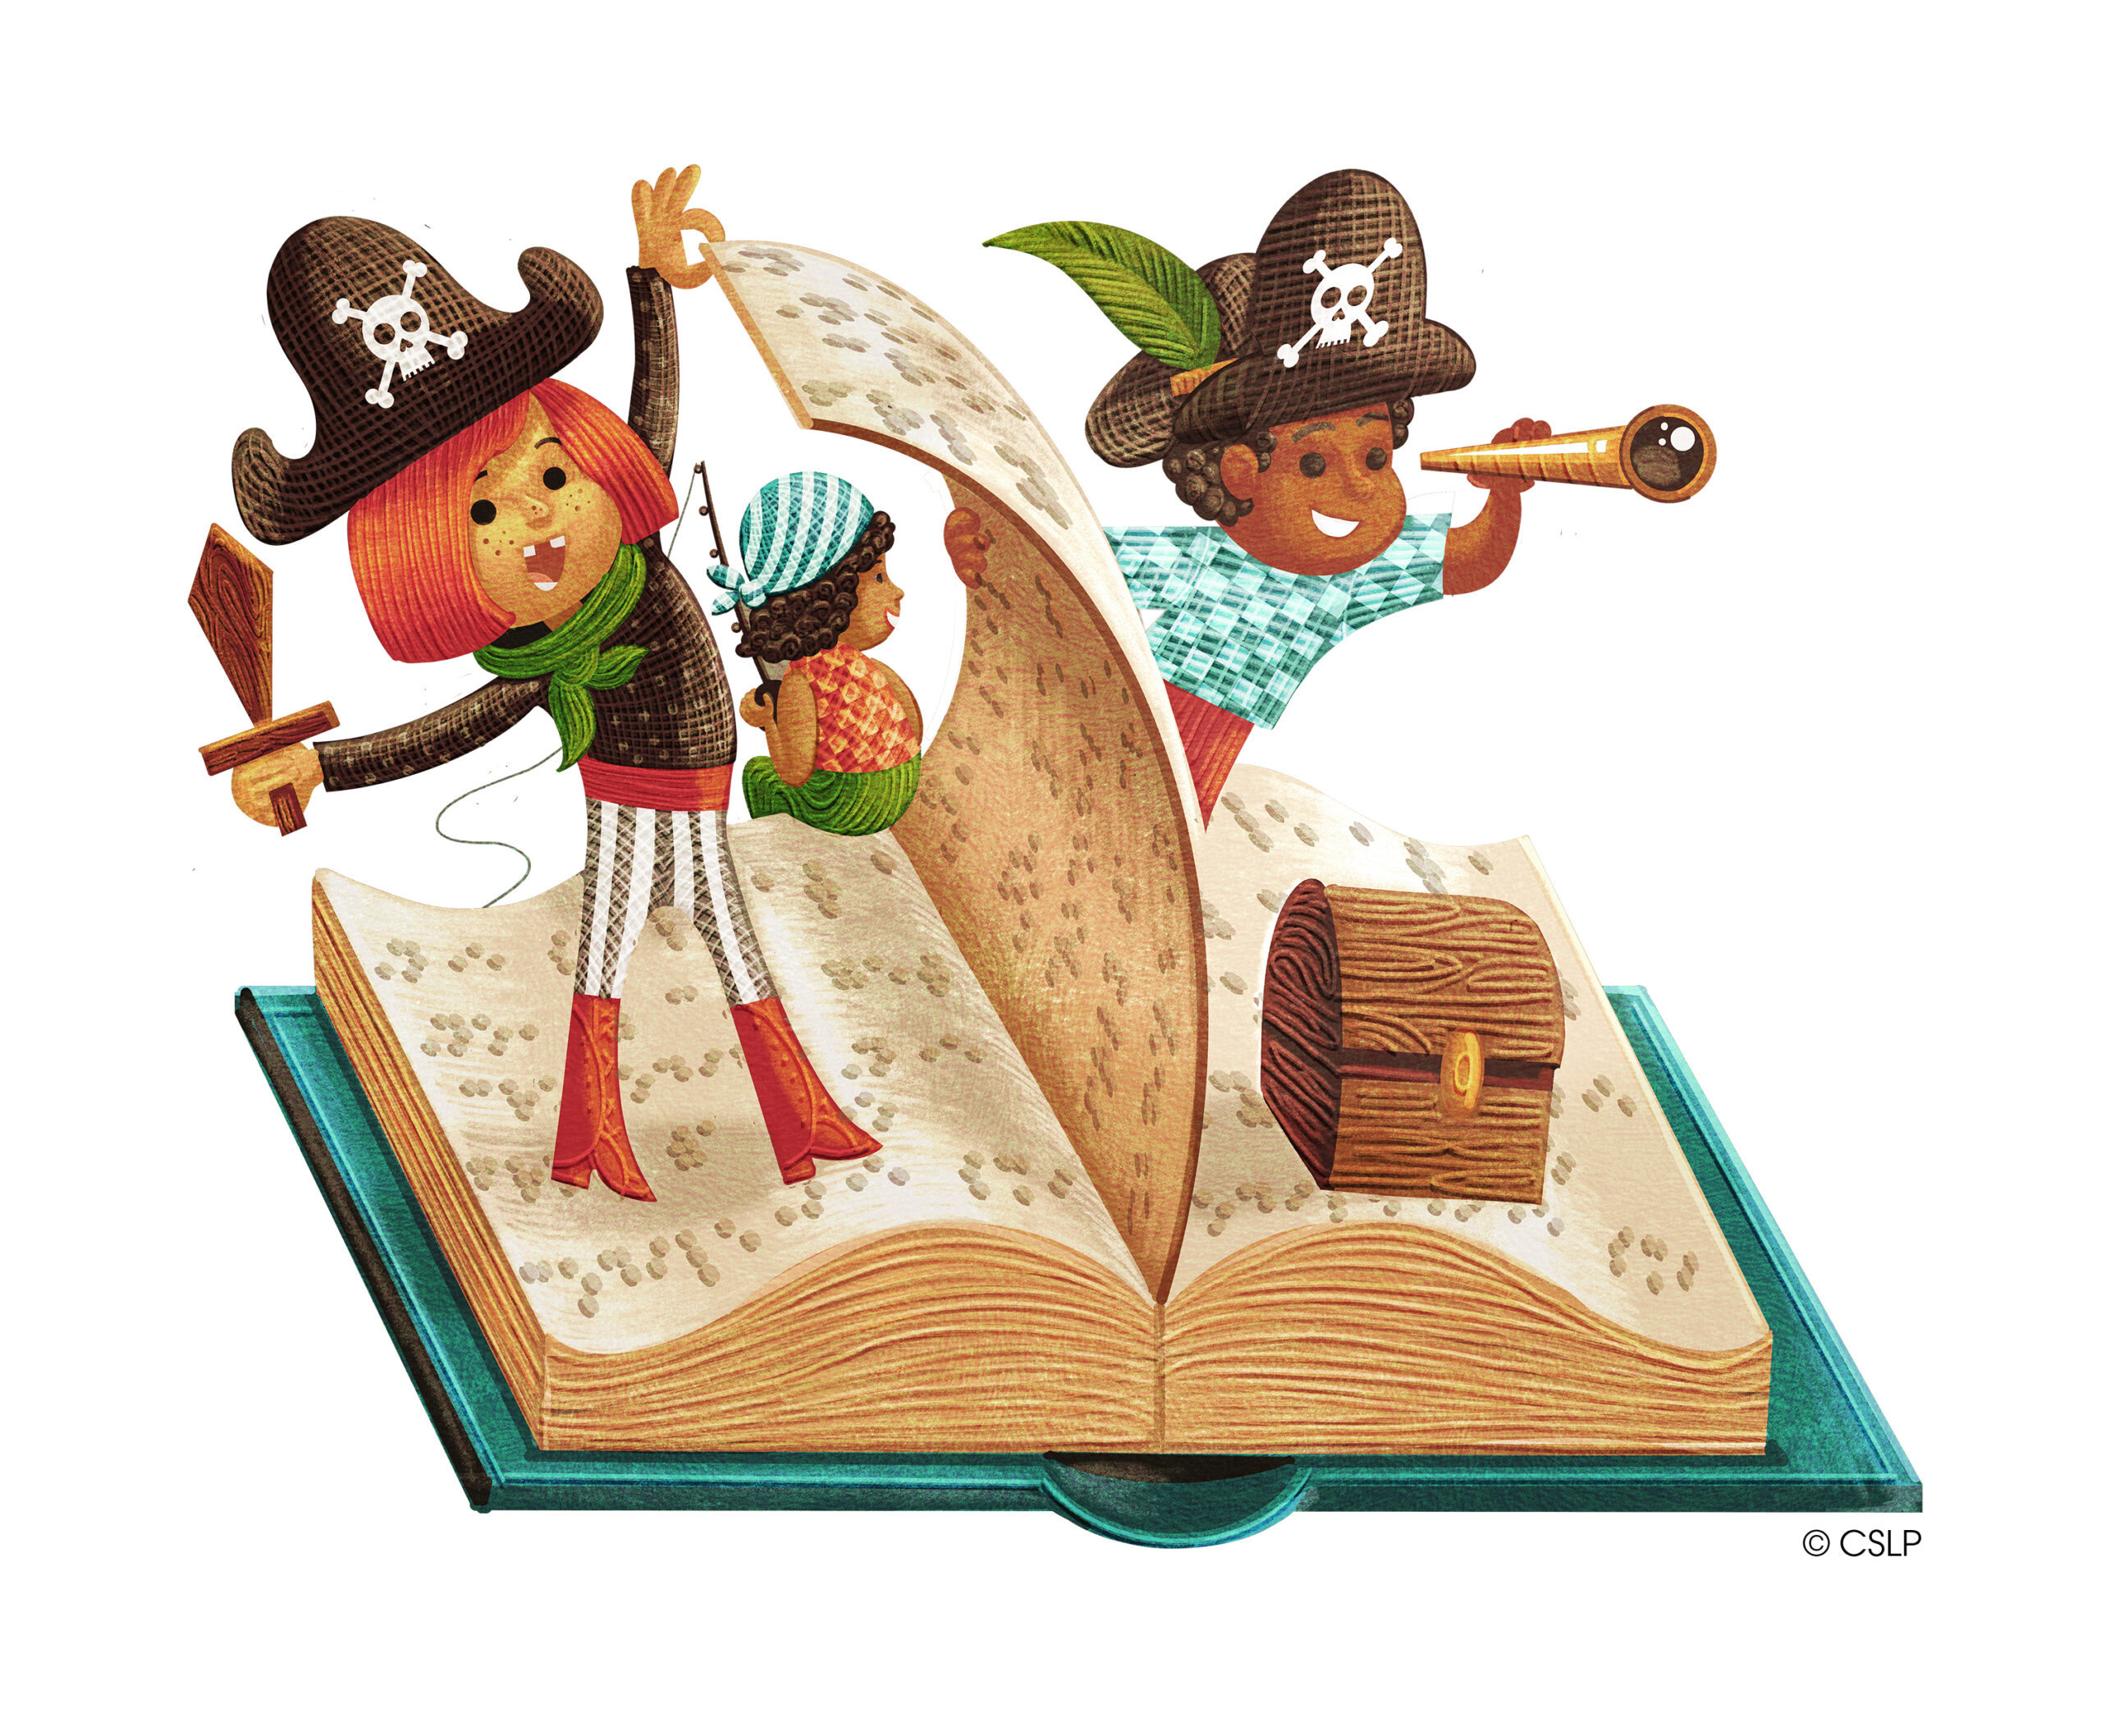 Two children dressed as pirates sail the high seas on an open book